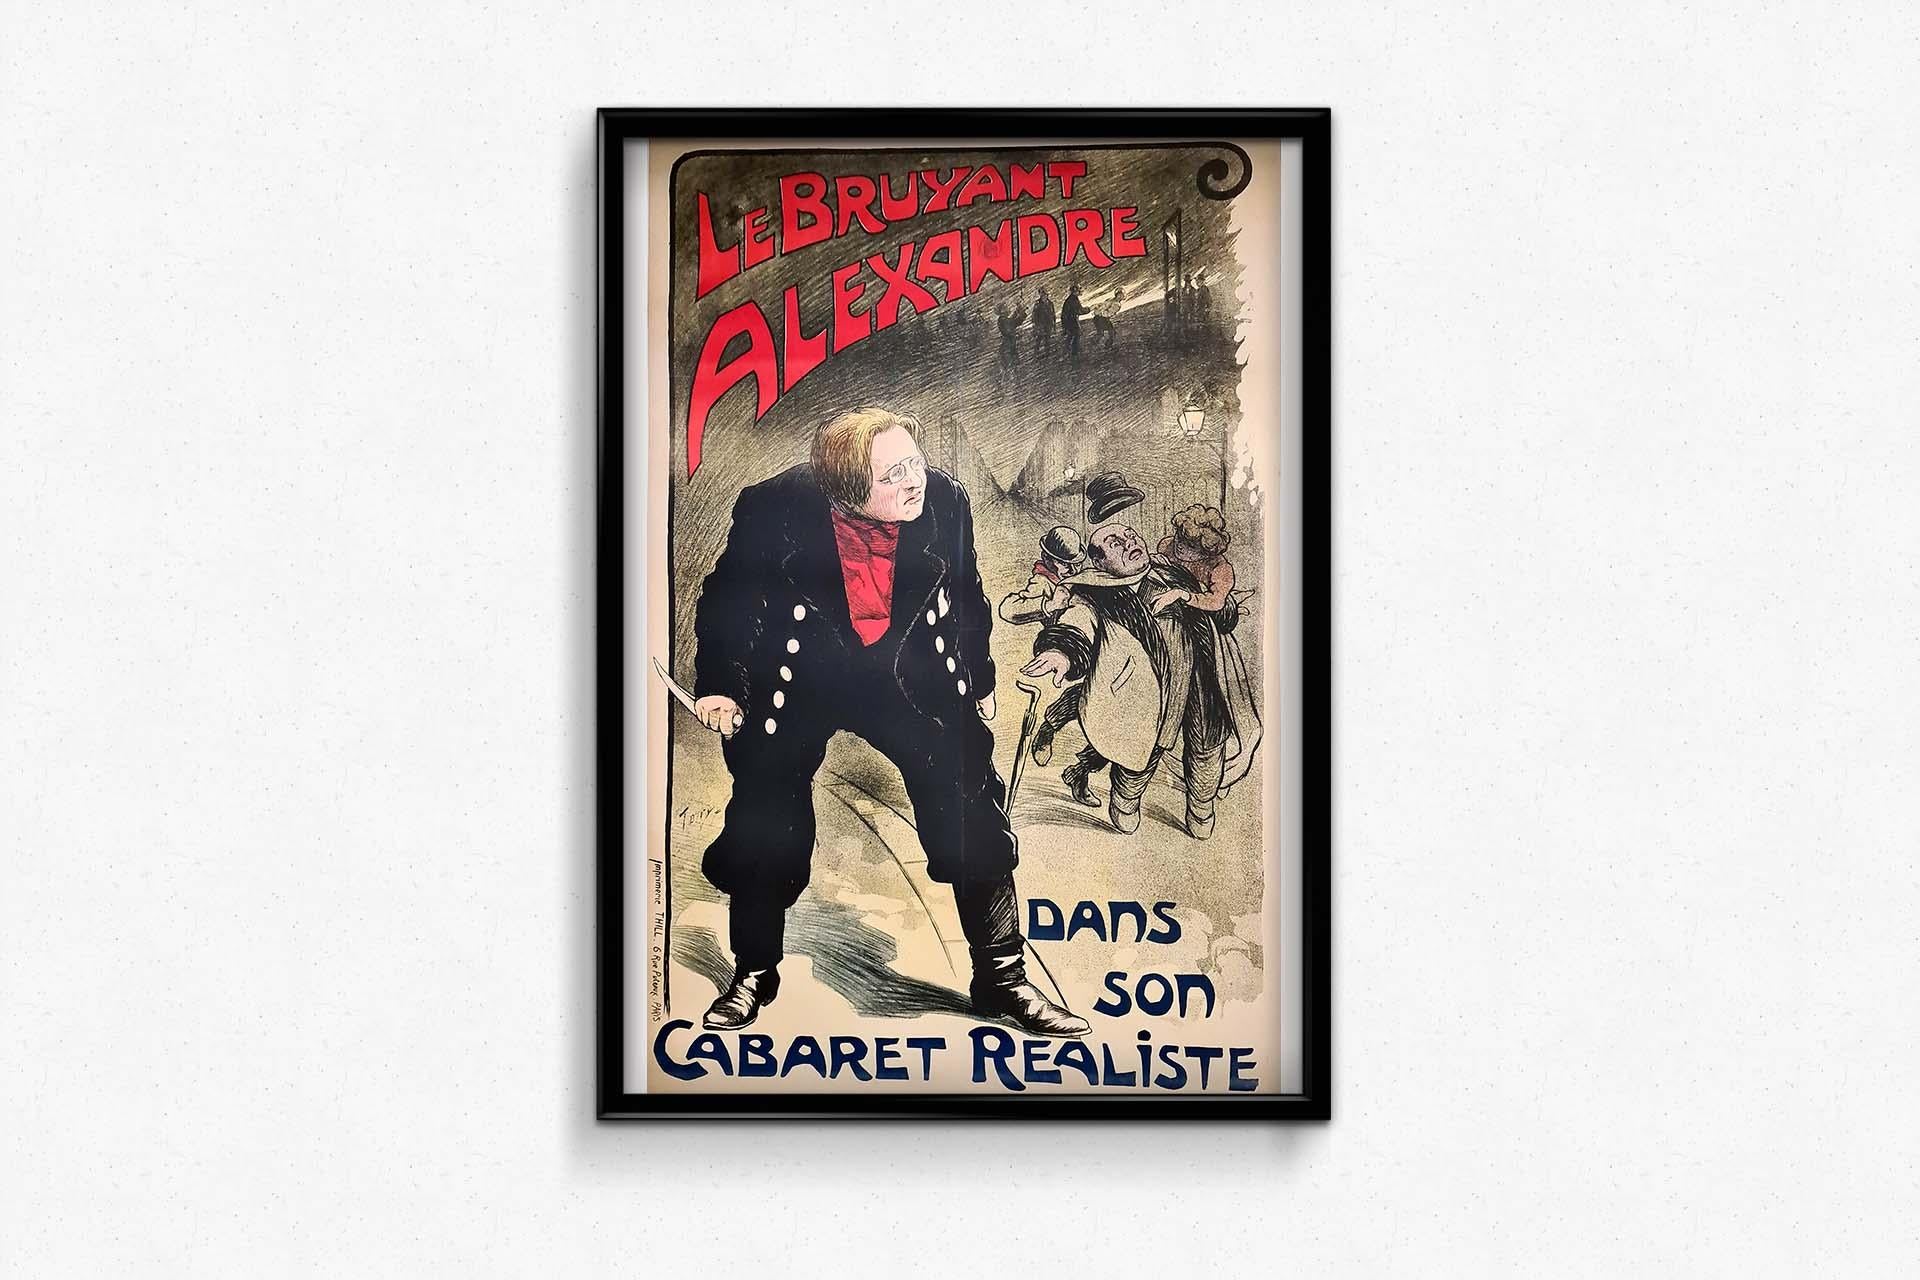 Art nouveau style poster from the beginning of the 20th century presenting Le Bruyant Alexandre in his realistic cabaret printed by the Thill printing house. Alexandre Ernest Célestin Leclerc, born on June 2, 1866 in Josselin, known as Le Bruyant